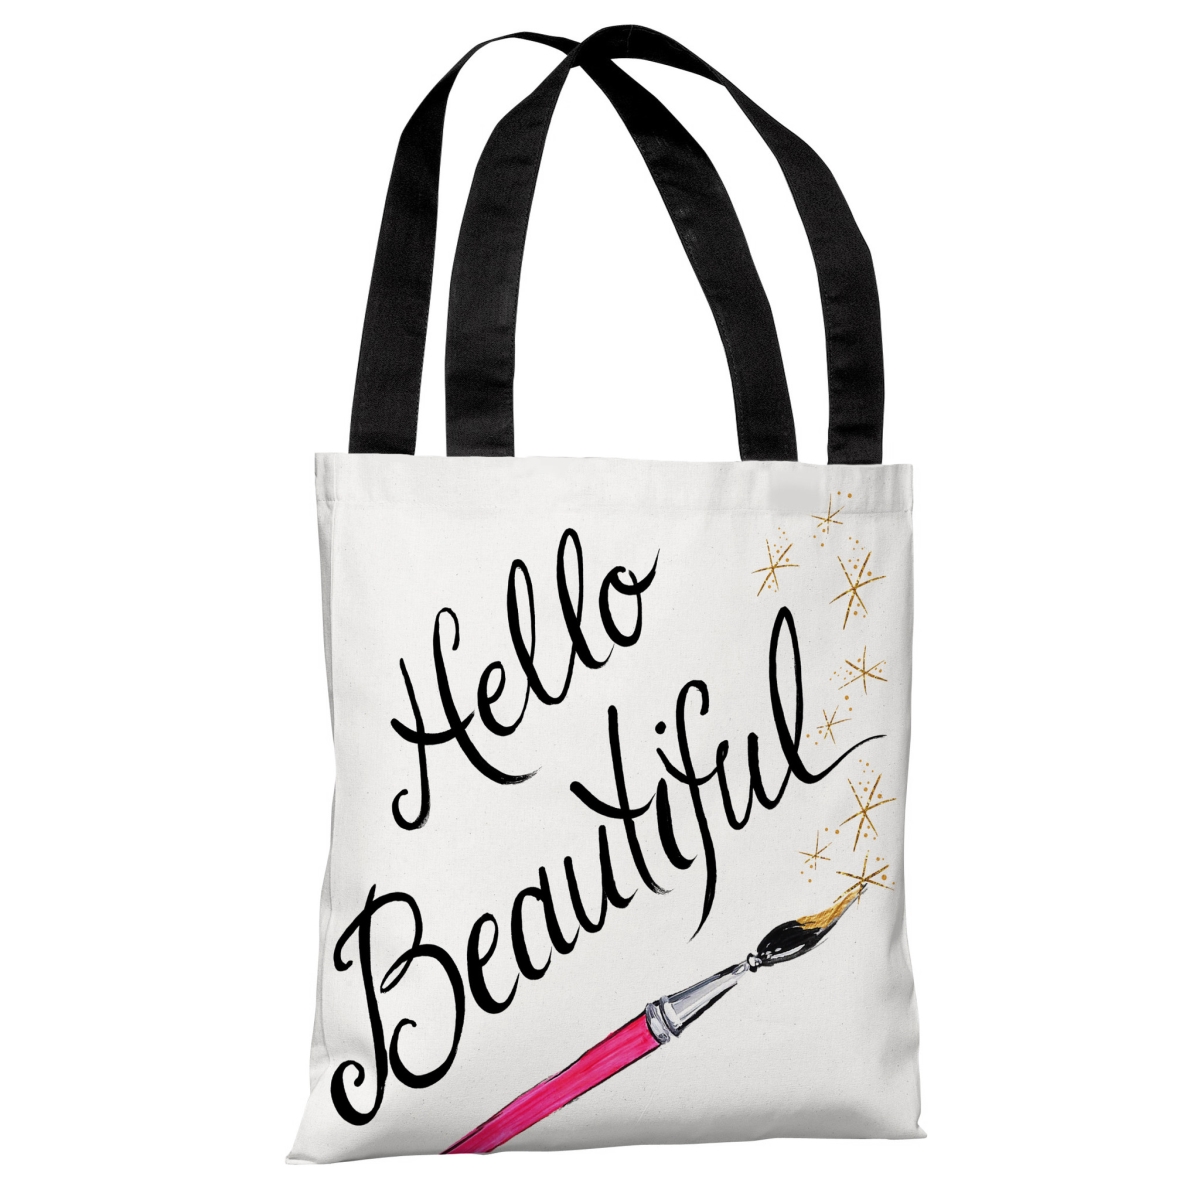 73058tt18p 18 In. Hello Beautiful Sparkles & Sparkles Polyester Tote Bag By Timree Gold - White, Black & Gold